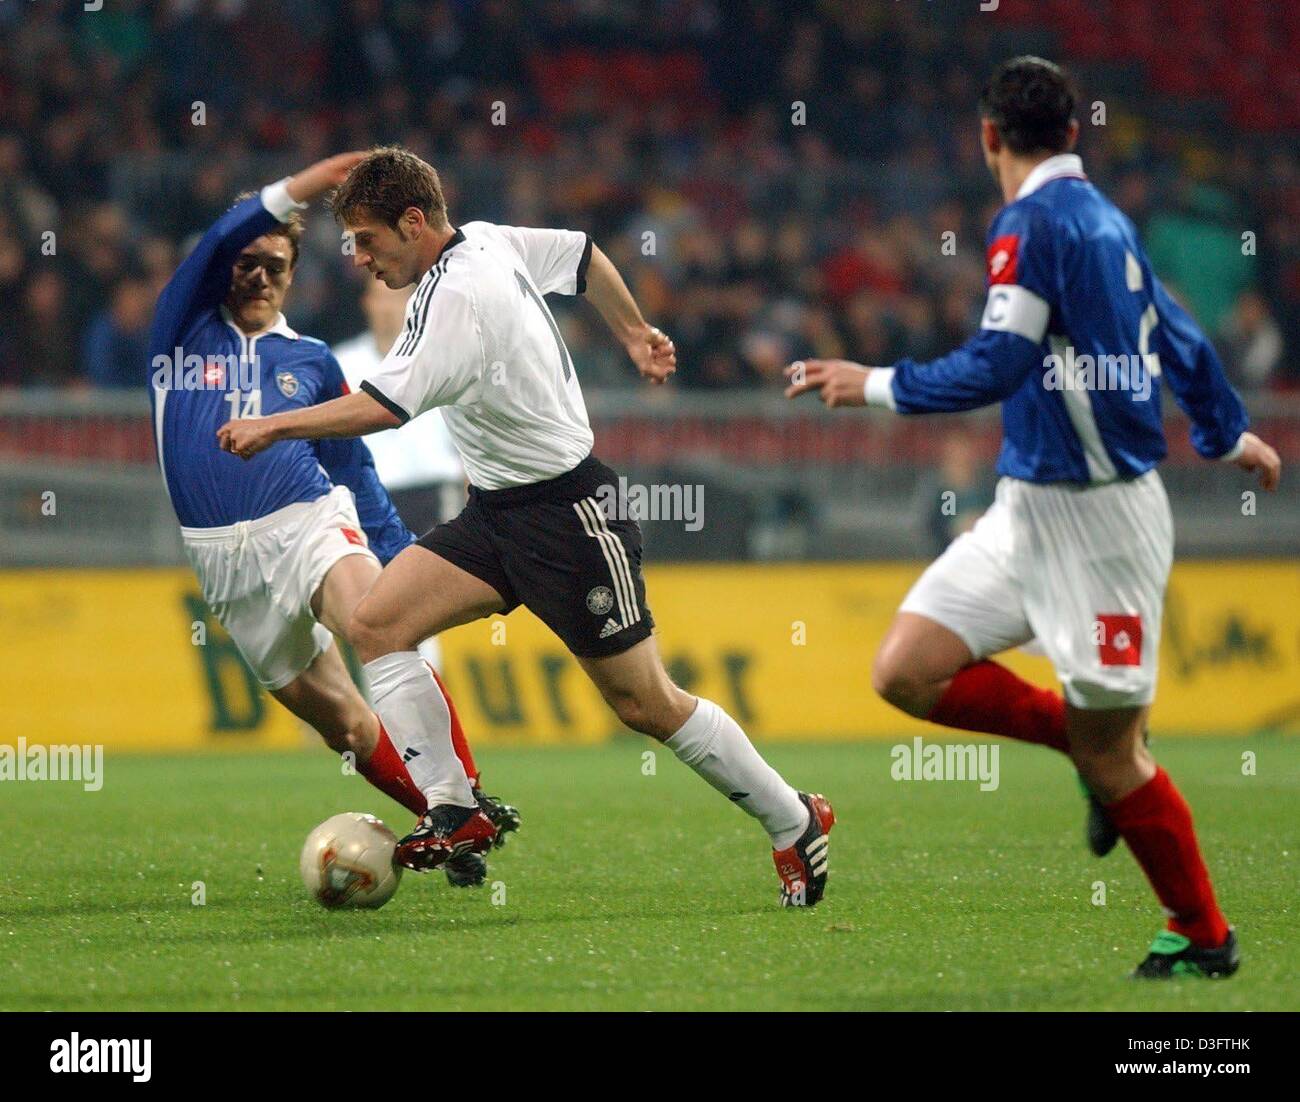 (dpa) - German midfielder Torsten Frings (C) struggles  for the ball with  Nenad Kovacevic (L) of Serbia-Montenegro while the team captain Zoran Mirkovic (R) of Serbia-Montenegro looks at the scene during the friendly international Germany against Serbia-Montenegro in Bremen, Germany, 30 April 2003. Germany won 1-0 (0-0). Stock Photo